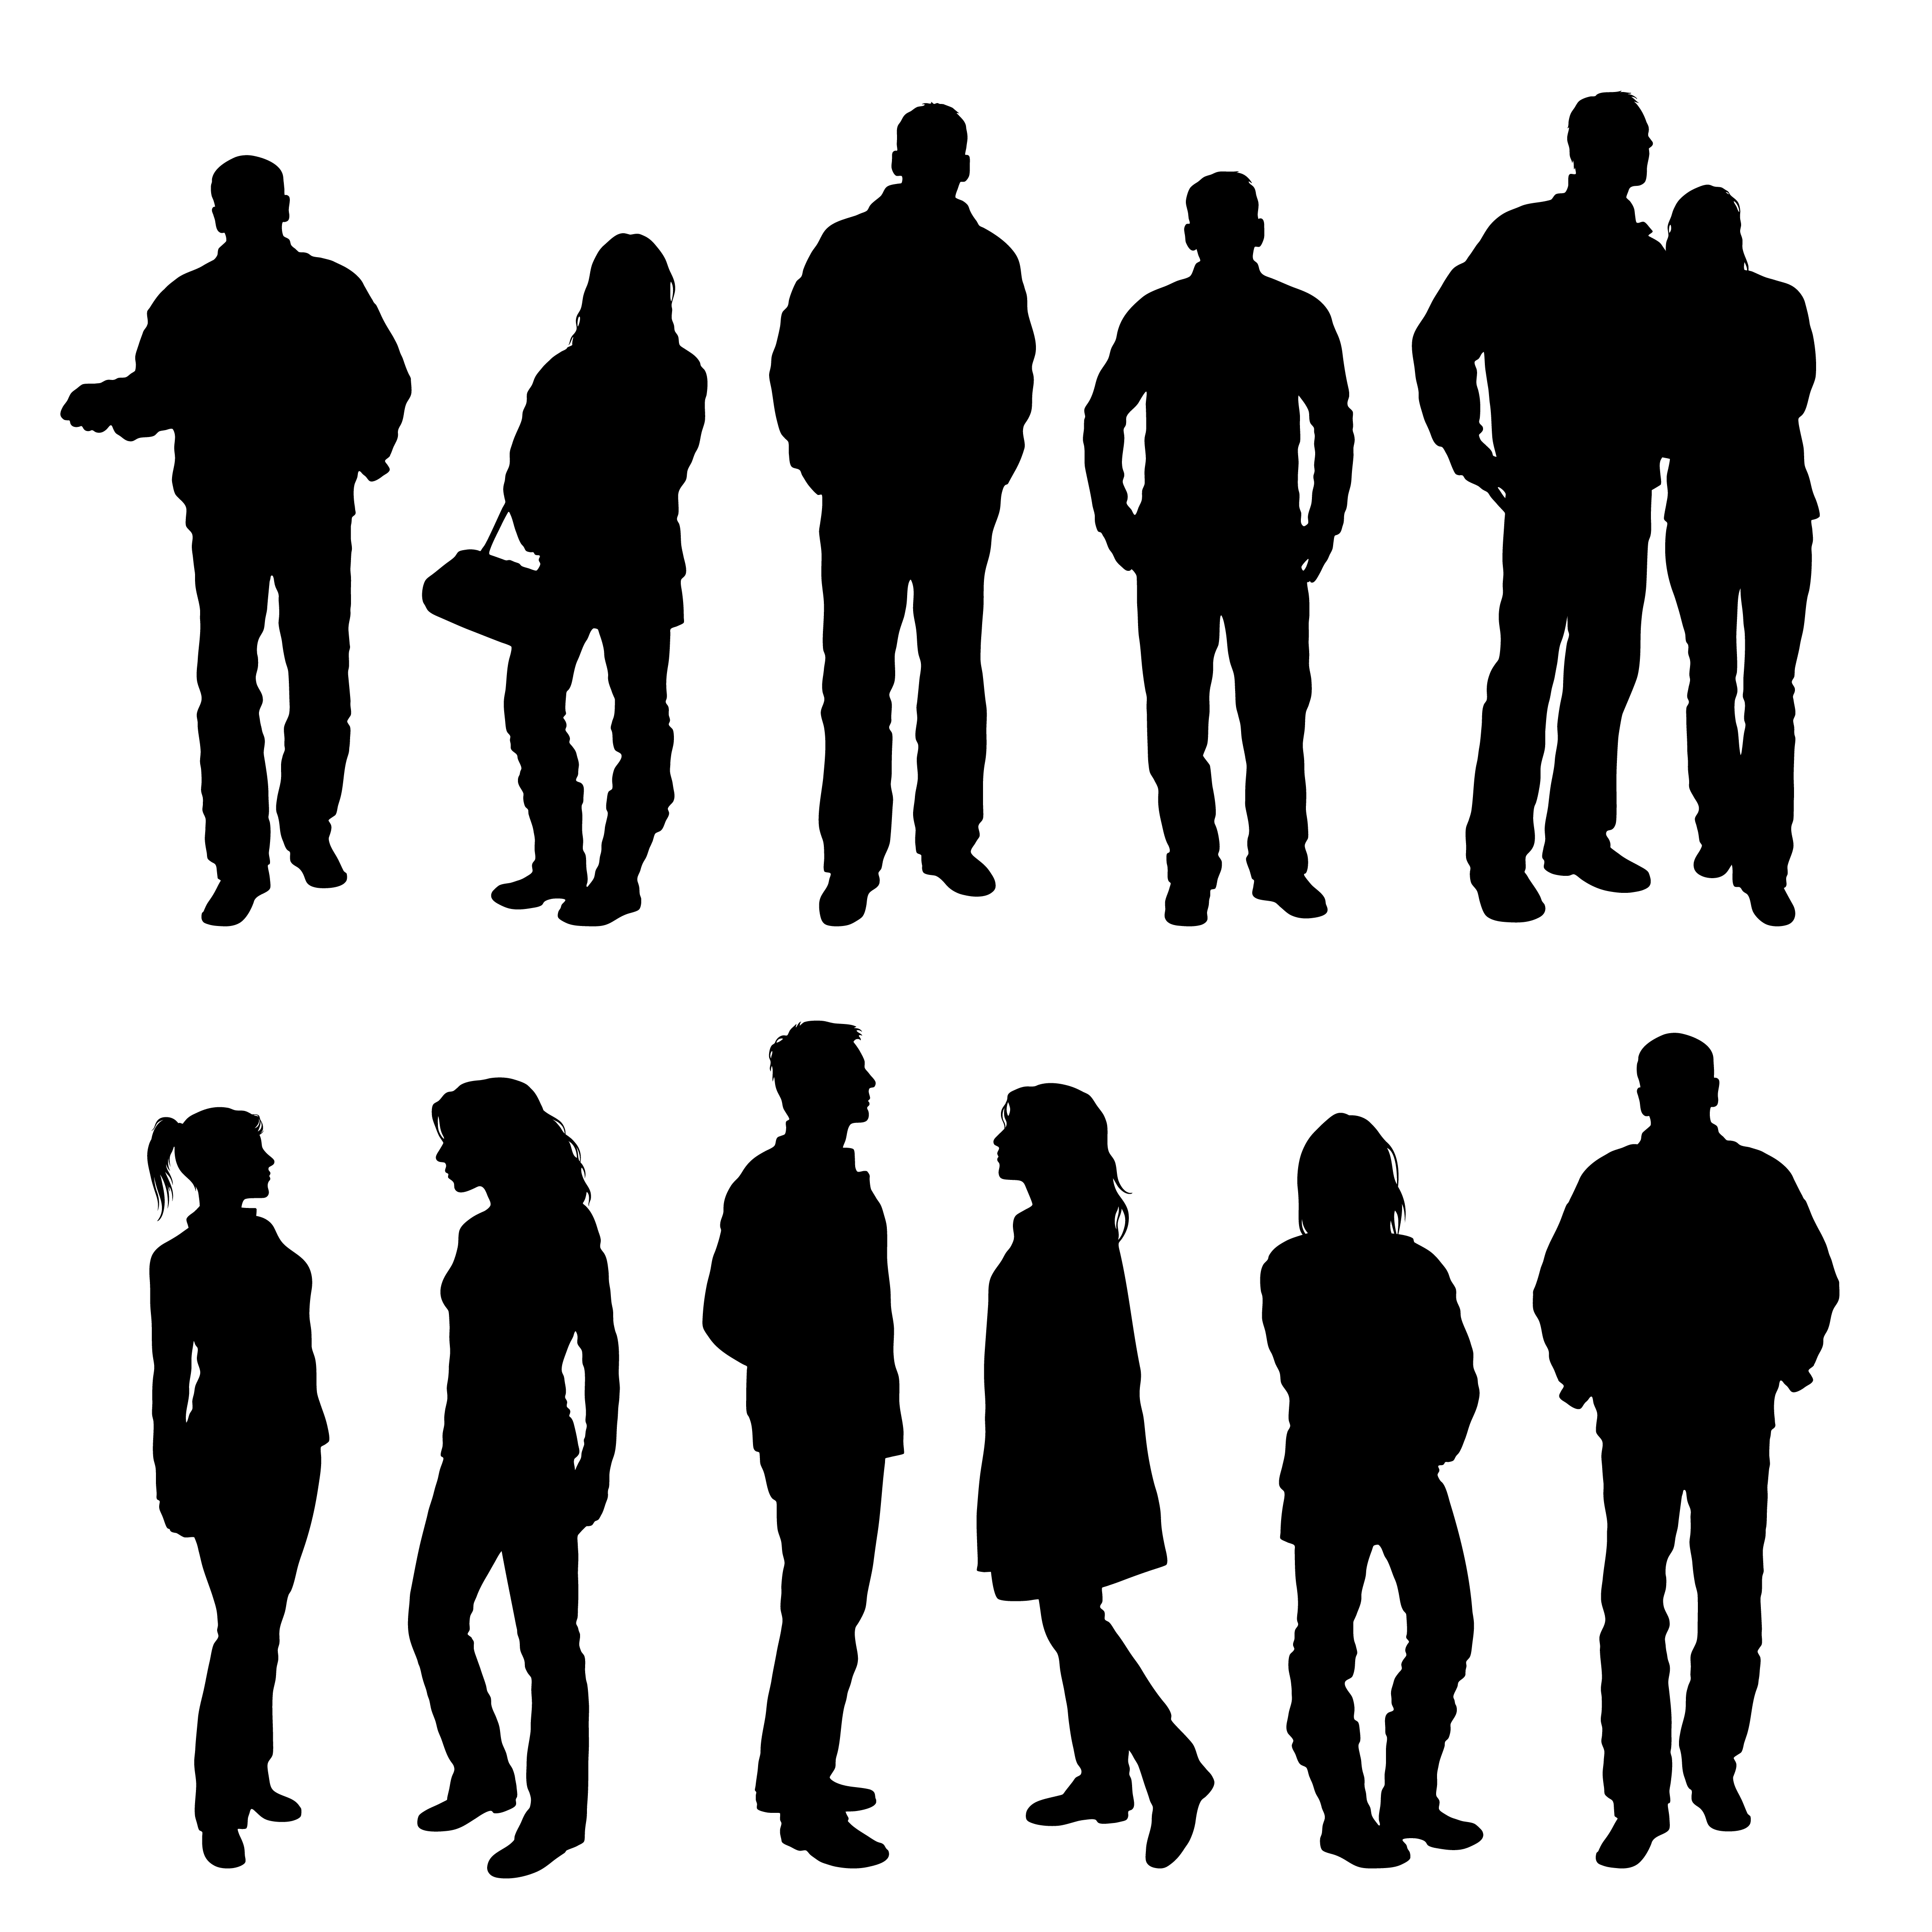 City people silhouettes - More to Be